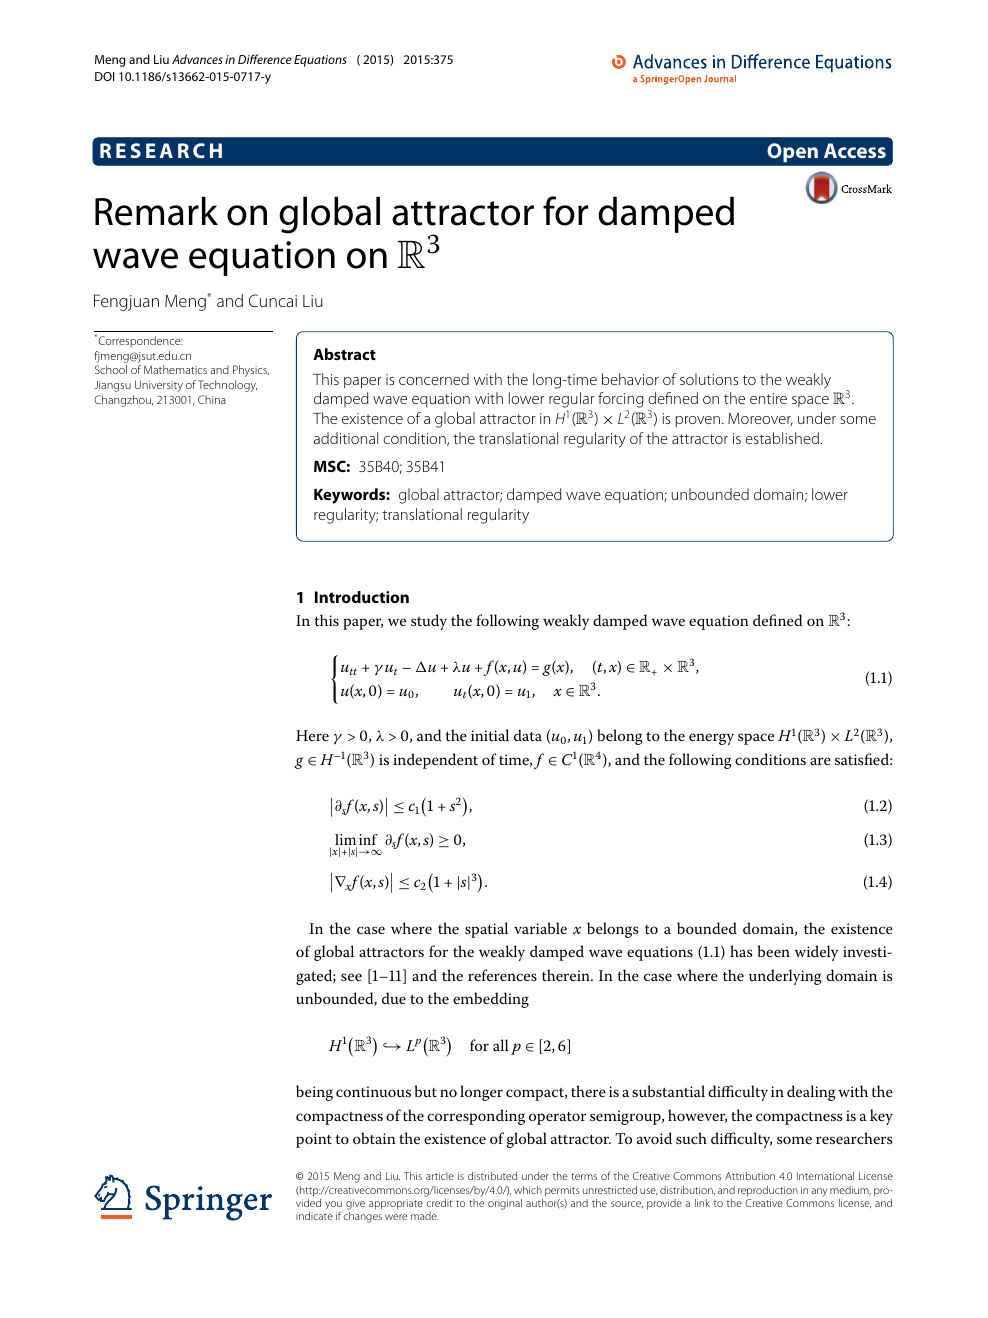 Remark On Global Attractor For Damped Wave Equation On R 3 Mathbb R 3 Topic Of Research Paper In Mathematics Download Scholarly Article Pdf And Read For Free On Cyberleninka Open Science Hub